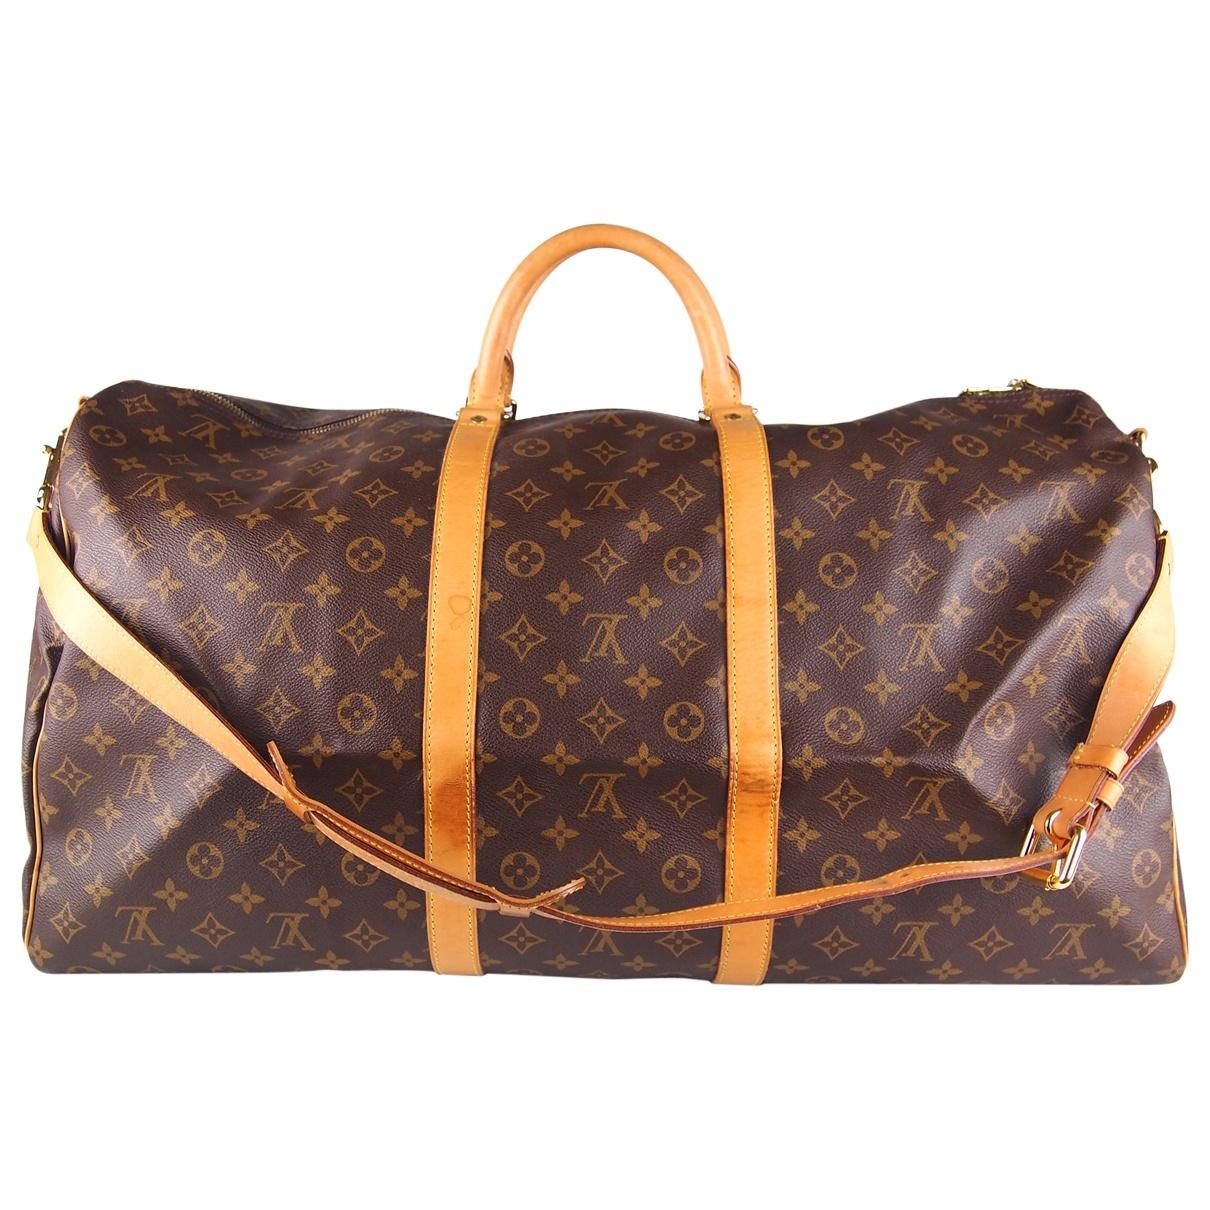 Lyst - Louis Vuitton Pre-owned Vintage Keepall Brown Cloth Travel Bags in Brown